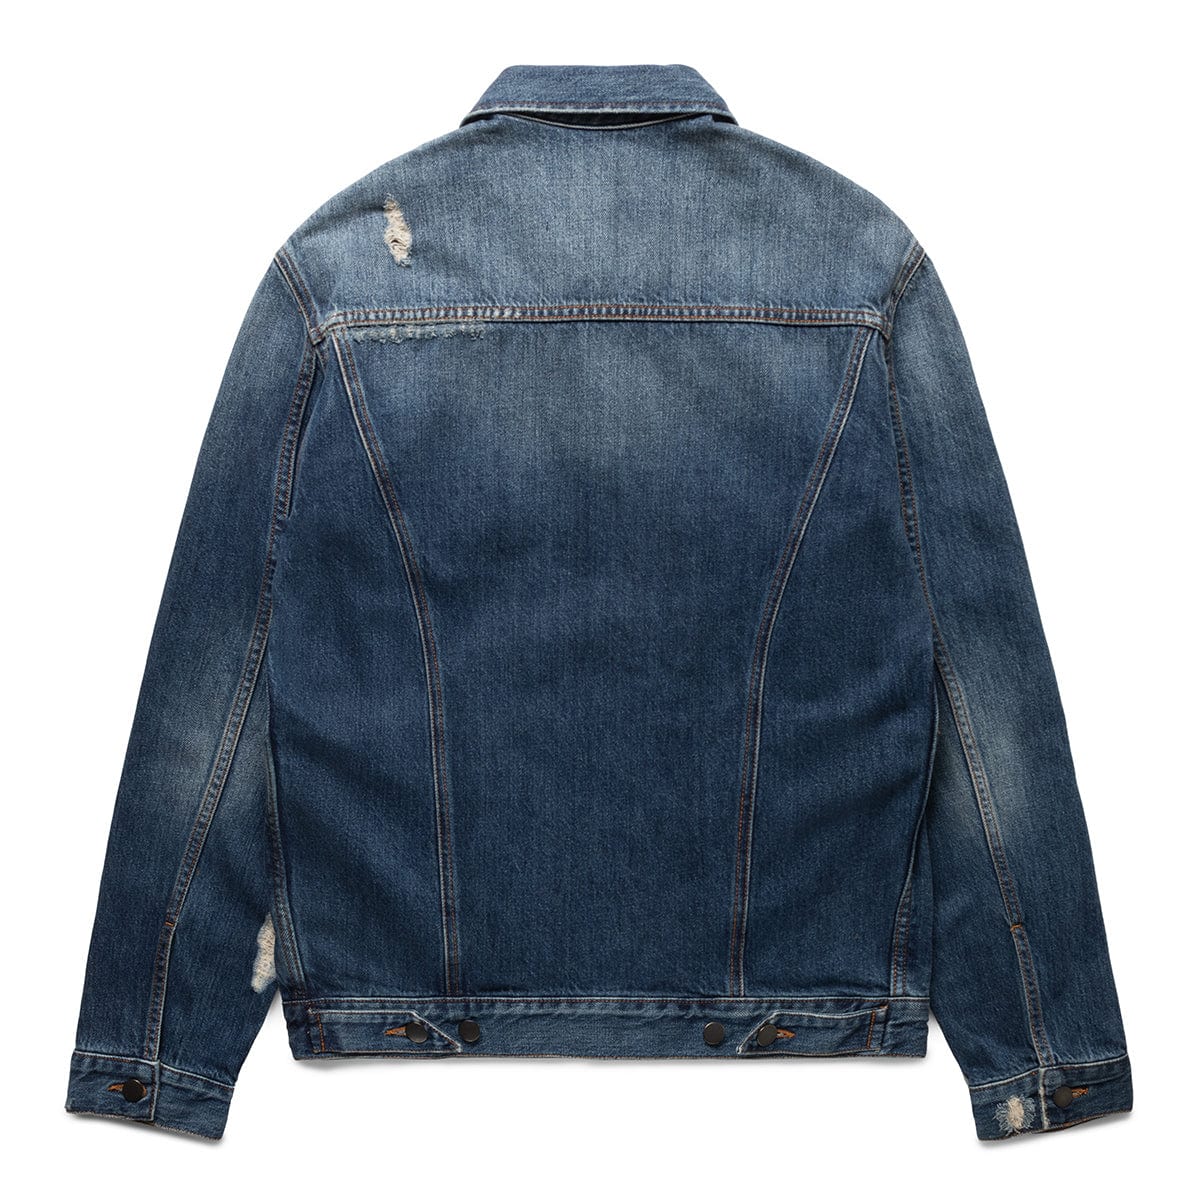 Just Cavalli Denim Jacket - Blue Outerwear, Clothing - WJU60061 | The  RealReal